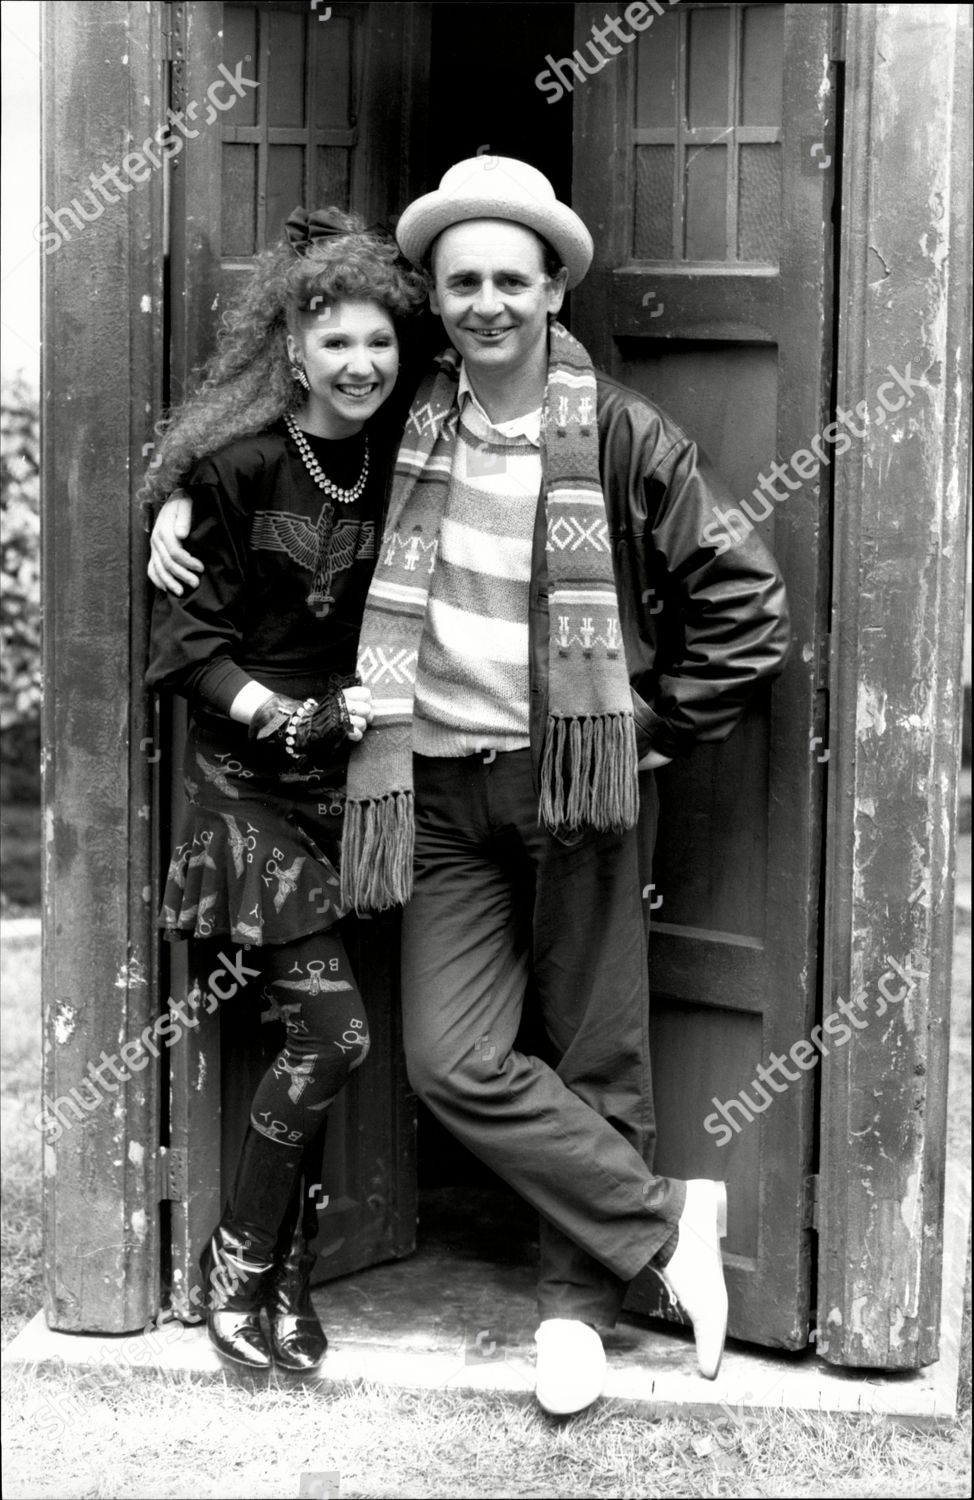 the-new-dr-who-shakespearean-actor-sylvester-mccoy-with-bonnie-langford-aboard-the-tardis-in-london-he-is-the-7th-dr-who-shutterstock-editorial-1446077a.jpg